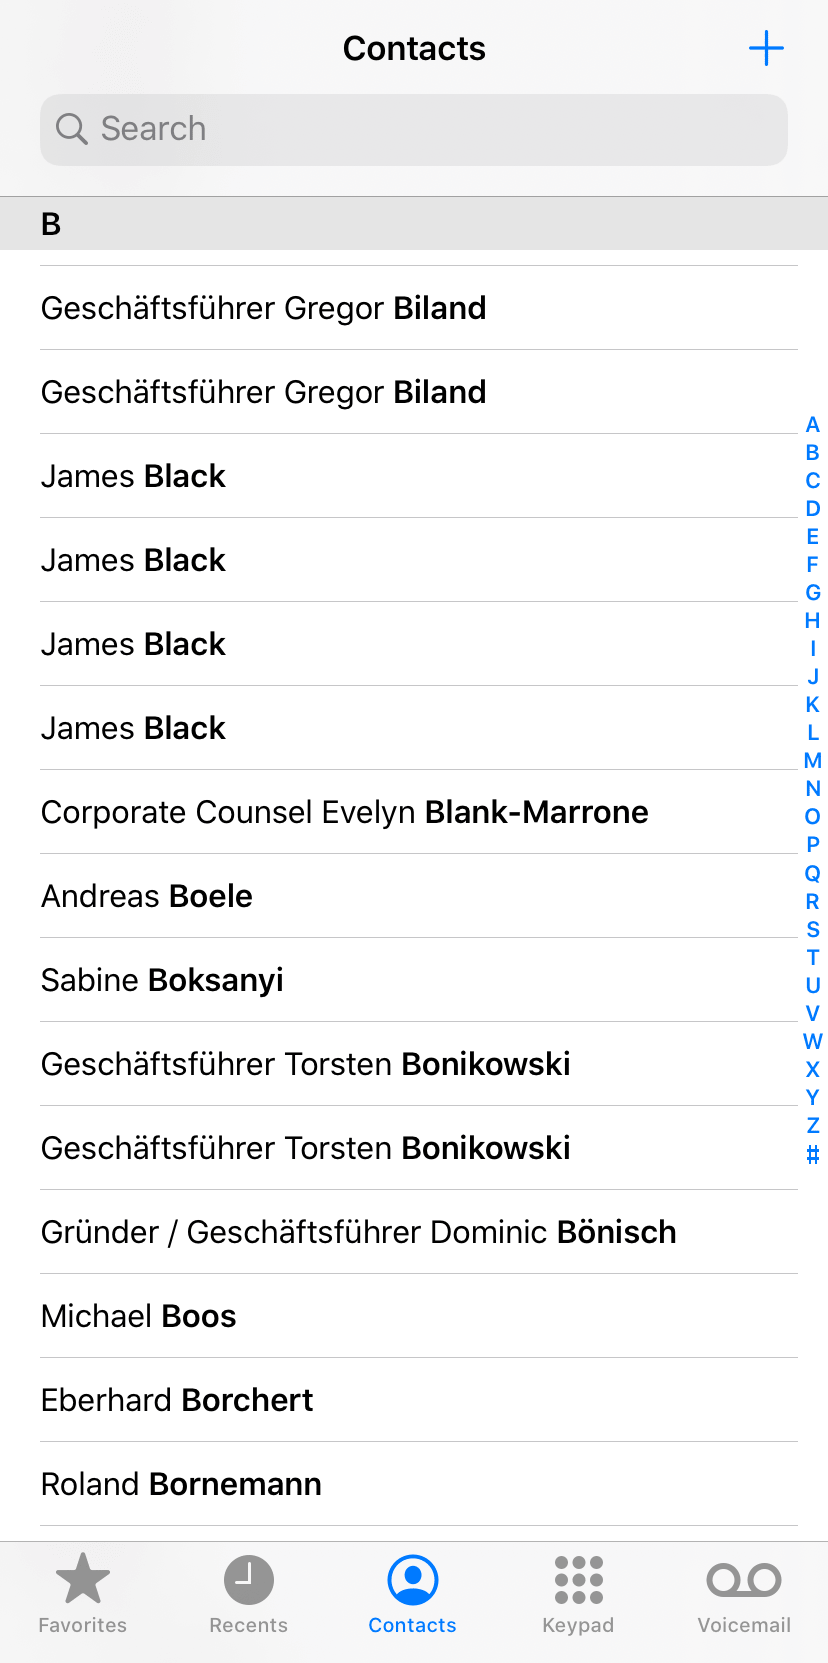 icloud produces duplicate contacts